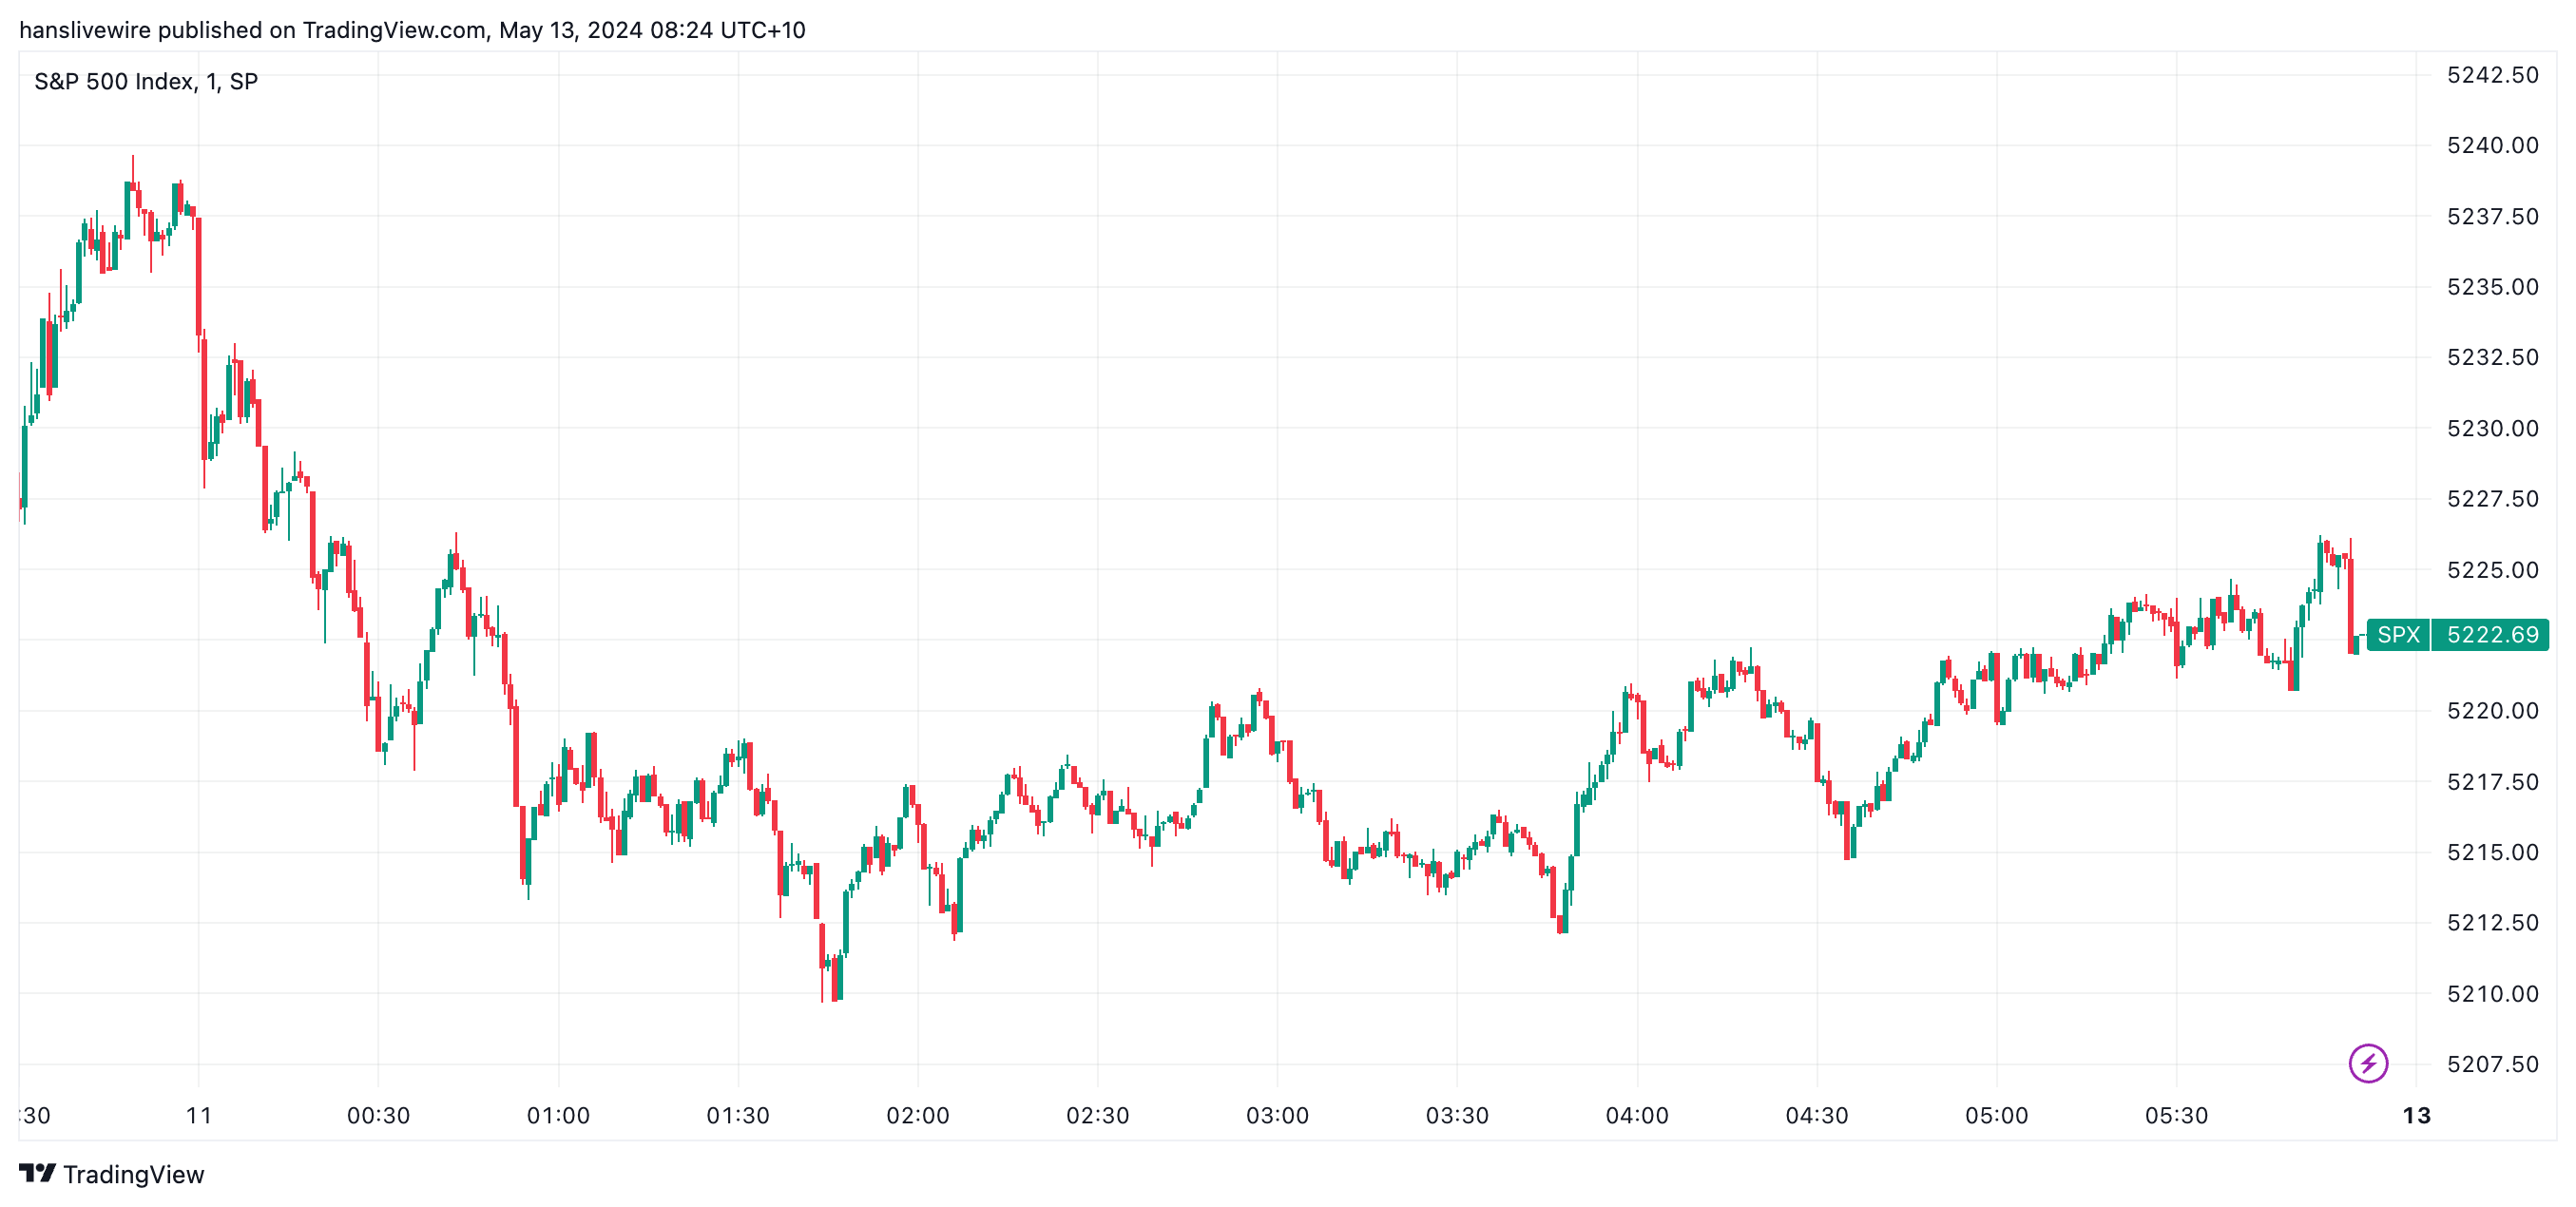 A downturn caused by the latest consumer sentiment figures was gradually recouped. (Source: TradingView)